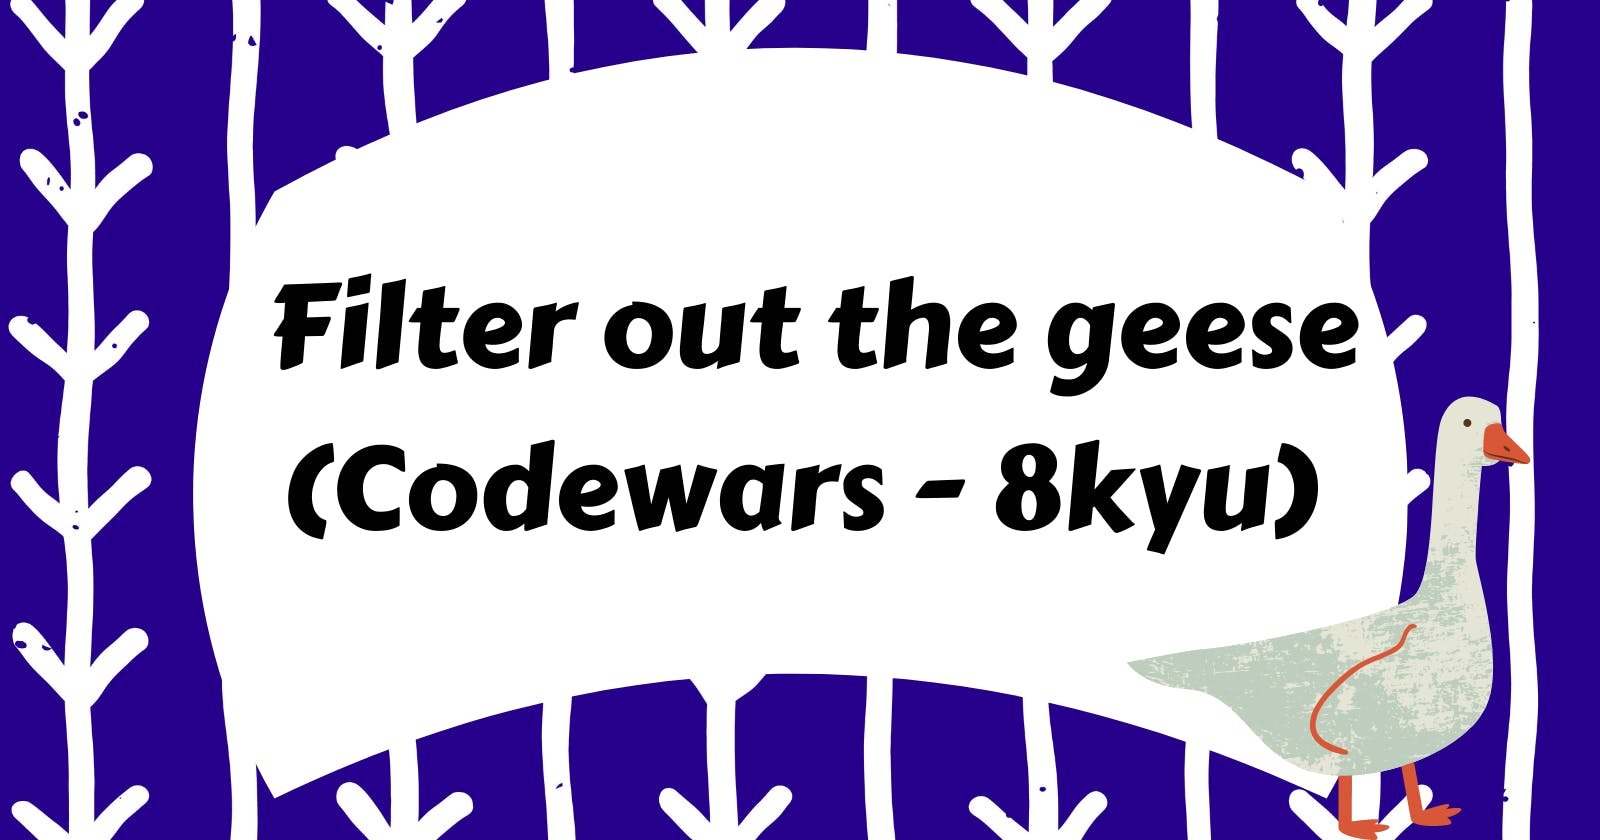 Filter out the geese (Codewars - 8kyu)